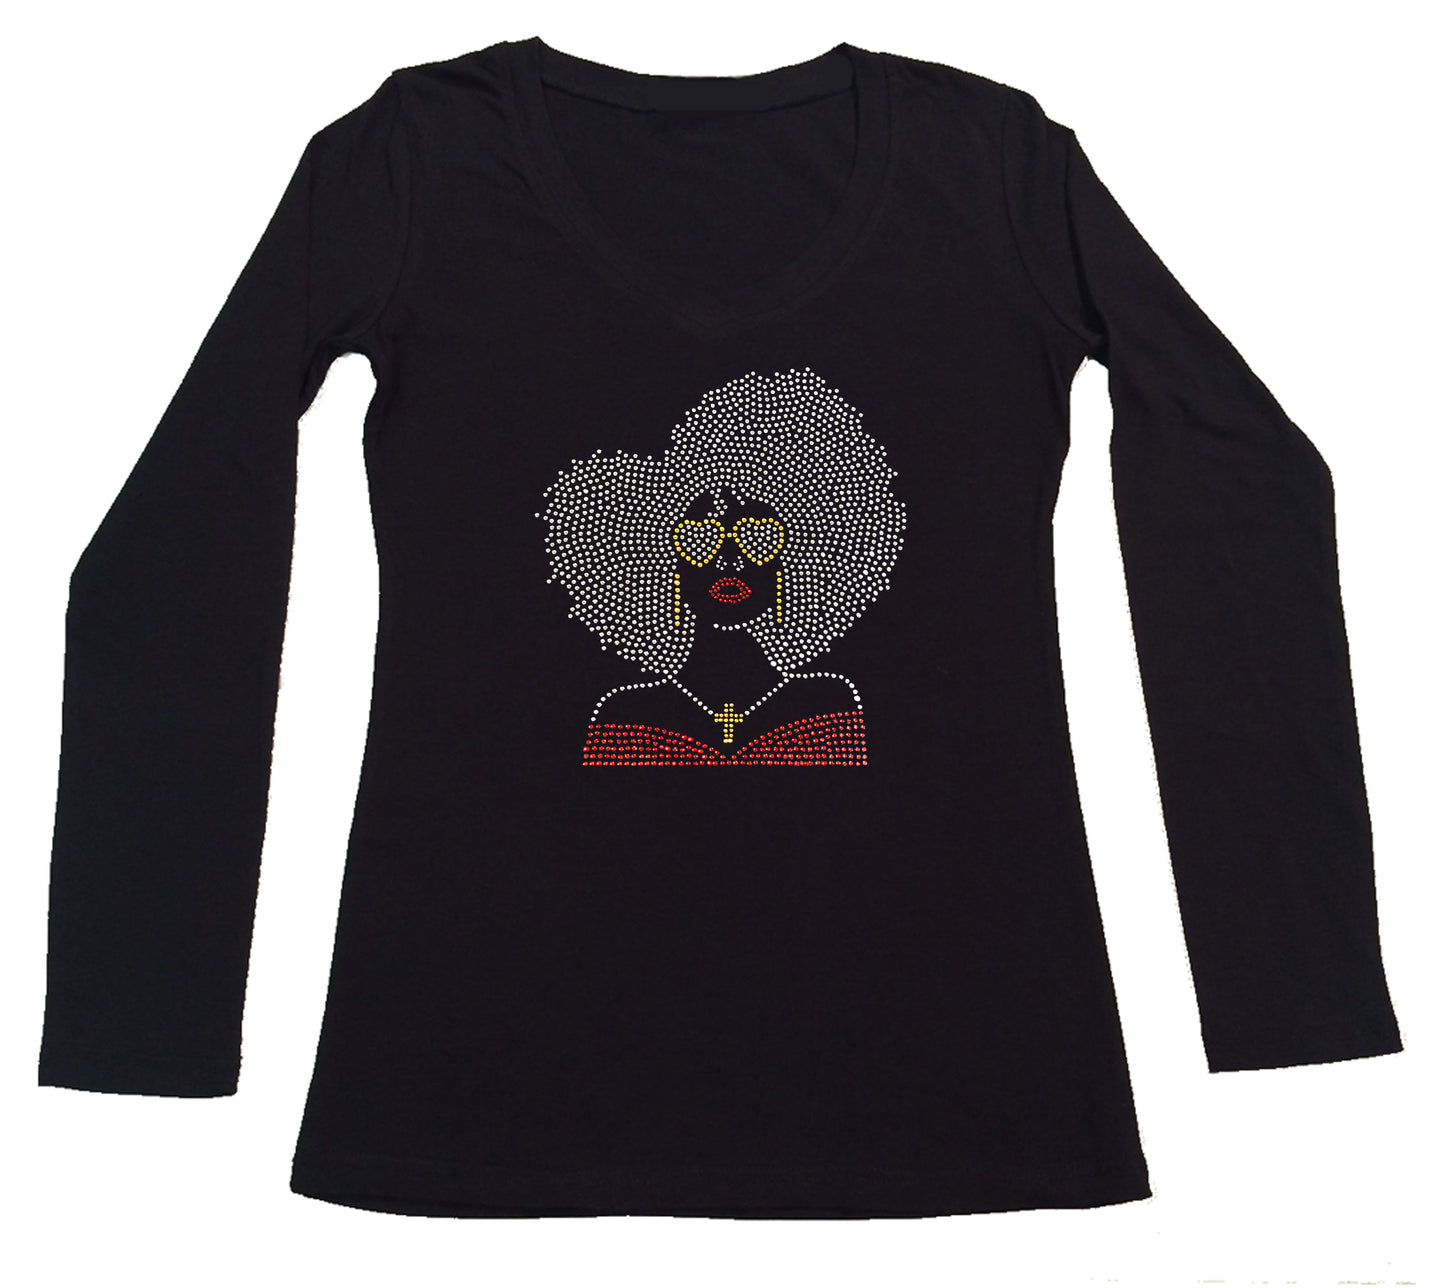 Womens T-shirt with Big Hair Girl with Glasses in Rhinestones